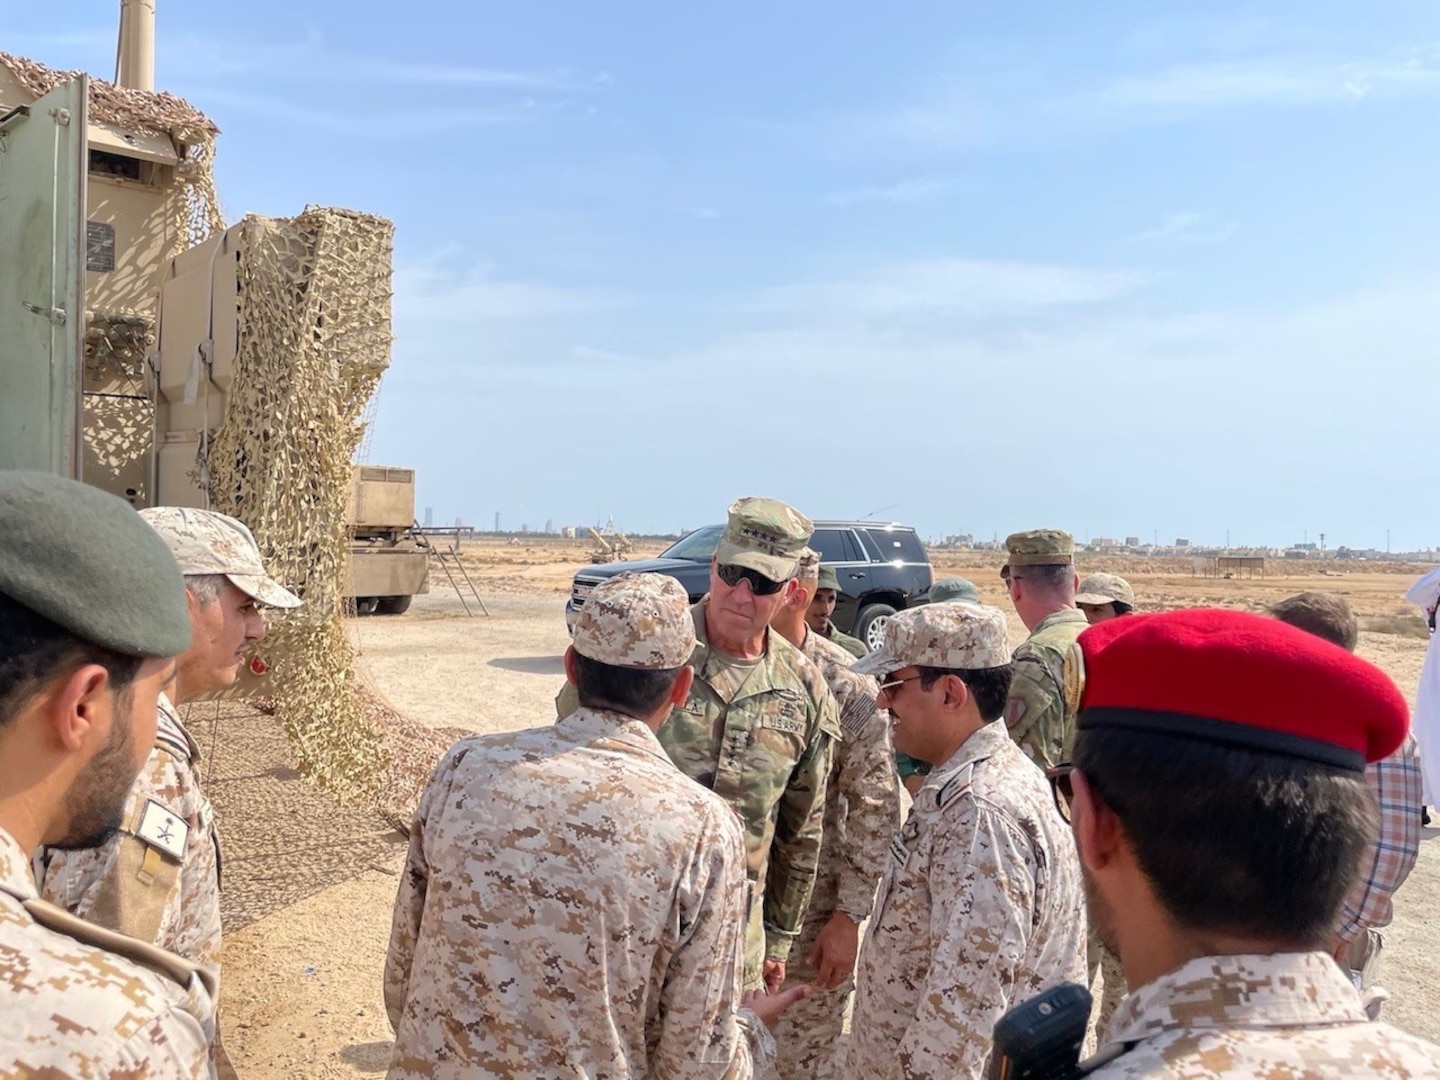 TAMPA, Fla. – Gen. Michael “Erik” Kurilla, commander of U.S. Central Command, along with Vice Adm. Charles “Brad” Cooper, commander of U.S. Navy Central, and Lt. Gen. Pat Frank, commander of U.S. Army Central, visited the Saudi Royal Armed Forces in the Kingdom of Saudi Arabia July 20-21.